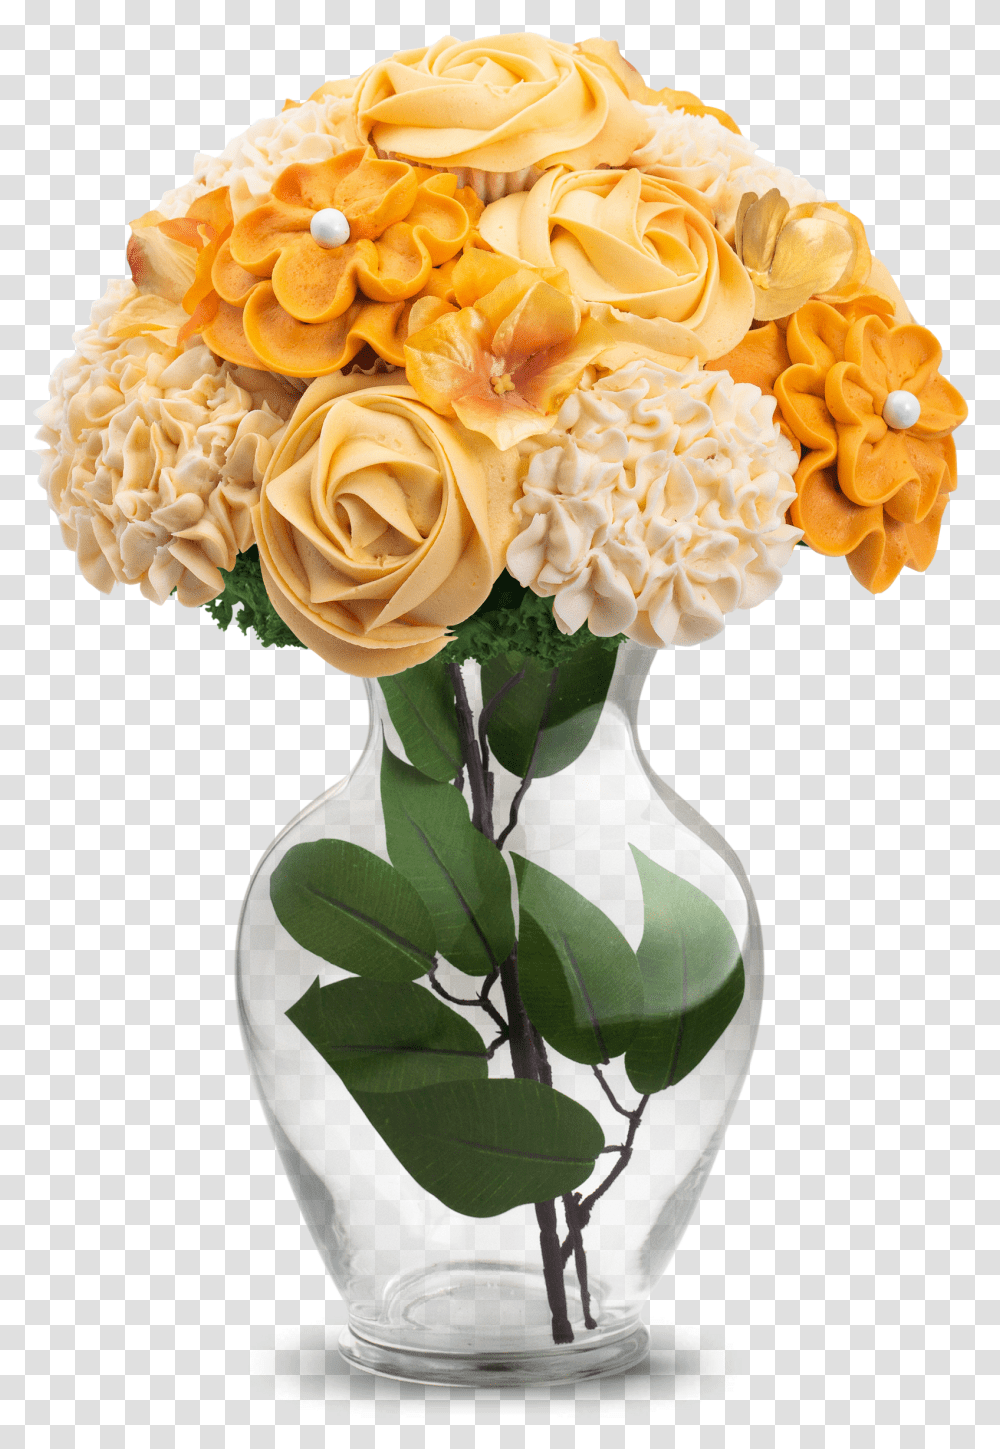 Baked Bouquet Flower & Cupcake Bouquets For Delivery Cupcake Bouquet Long Stem Transparent Png